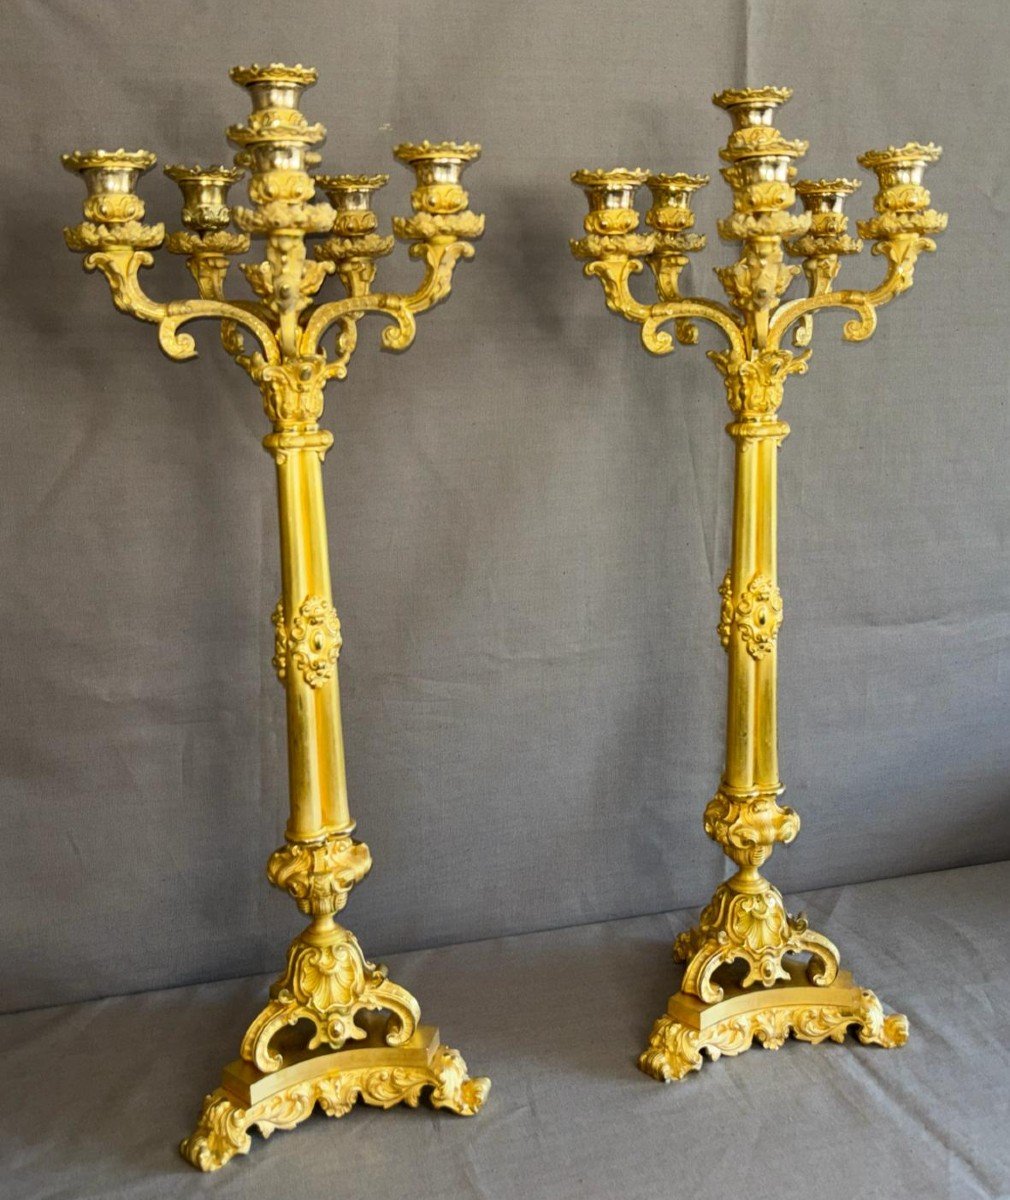 Pair Of Large Candelabras From The Louis-philippe Period From The 19th Century-photo-4